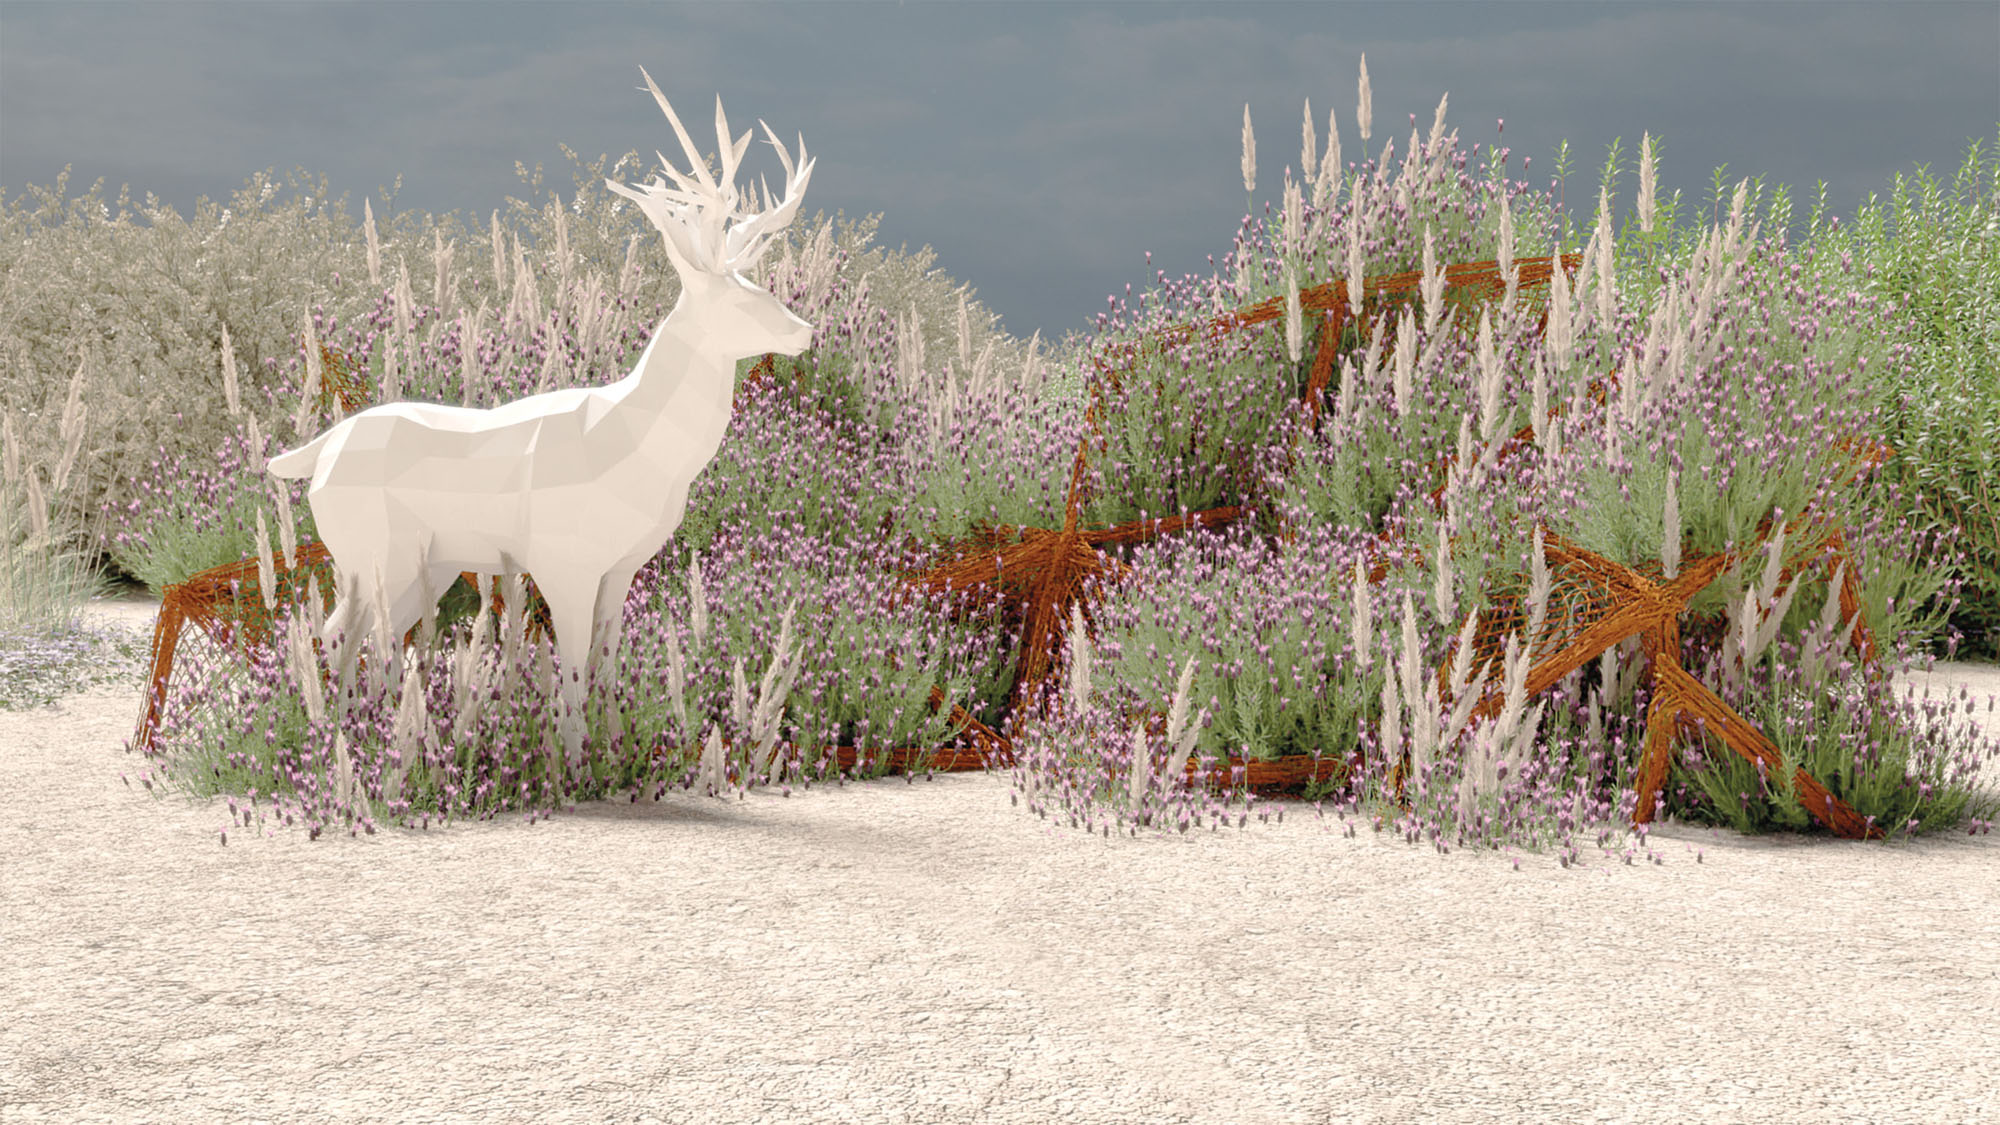 rendering of a deer in an artificial natural landscape